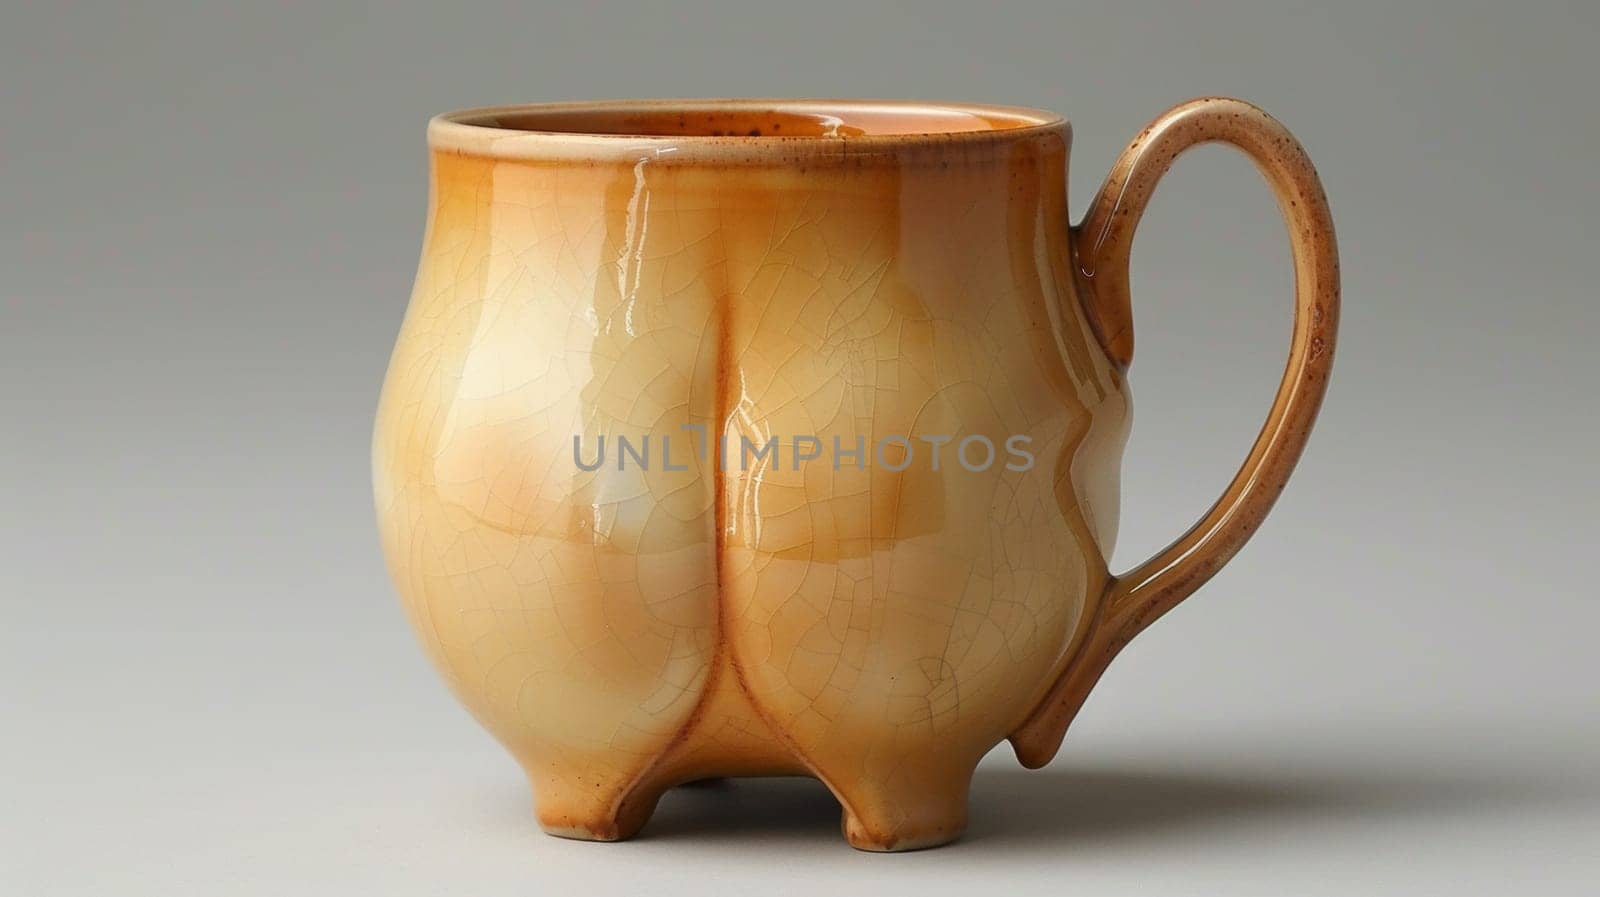 A close up of a brown mug with an unusual design